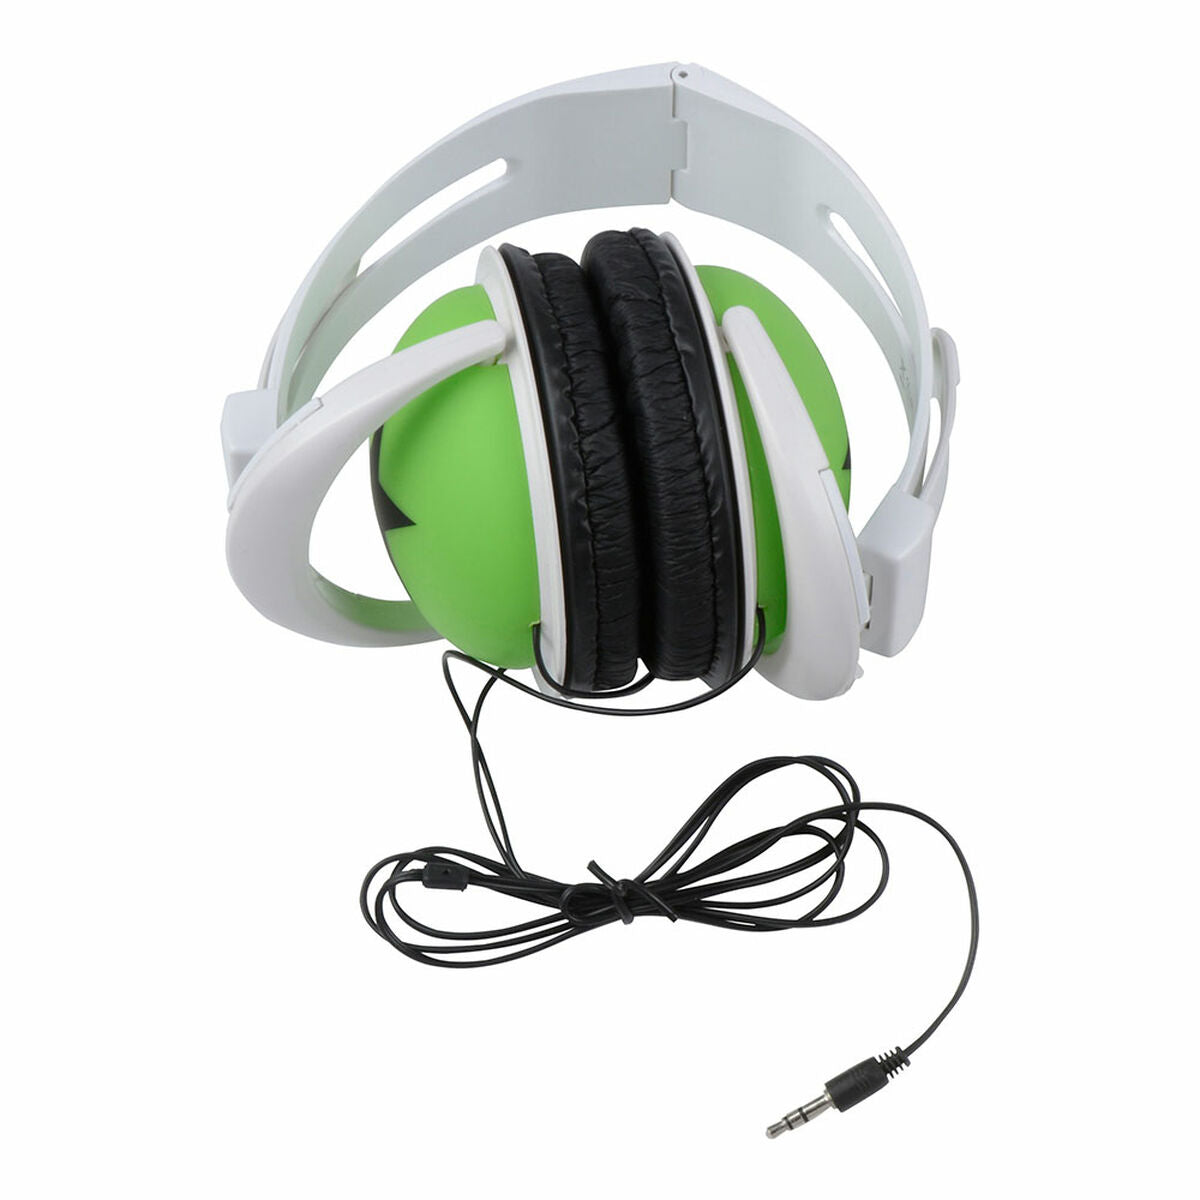 Headphones with Headband Estrella, BigBuy Tech, Electronics, Mobile communication and accessories, headphones-with-headband-estrella, :Wired Headphones, Brand_BigBuy Tech, category-reference-2609, category-reference-2642, category-reference-2847, category-reference-t-19653, category-reference-t-21312, category-reference-t-4036, category-reference-t-4037, computers / peripherals, Condition_NEW, entertainment, gadget, music, office, Price_20 - 50, telephones & tablets, Teleworking, RiotNook